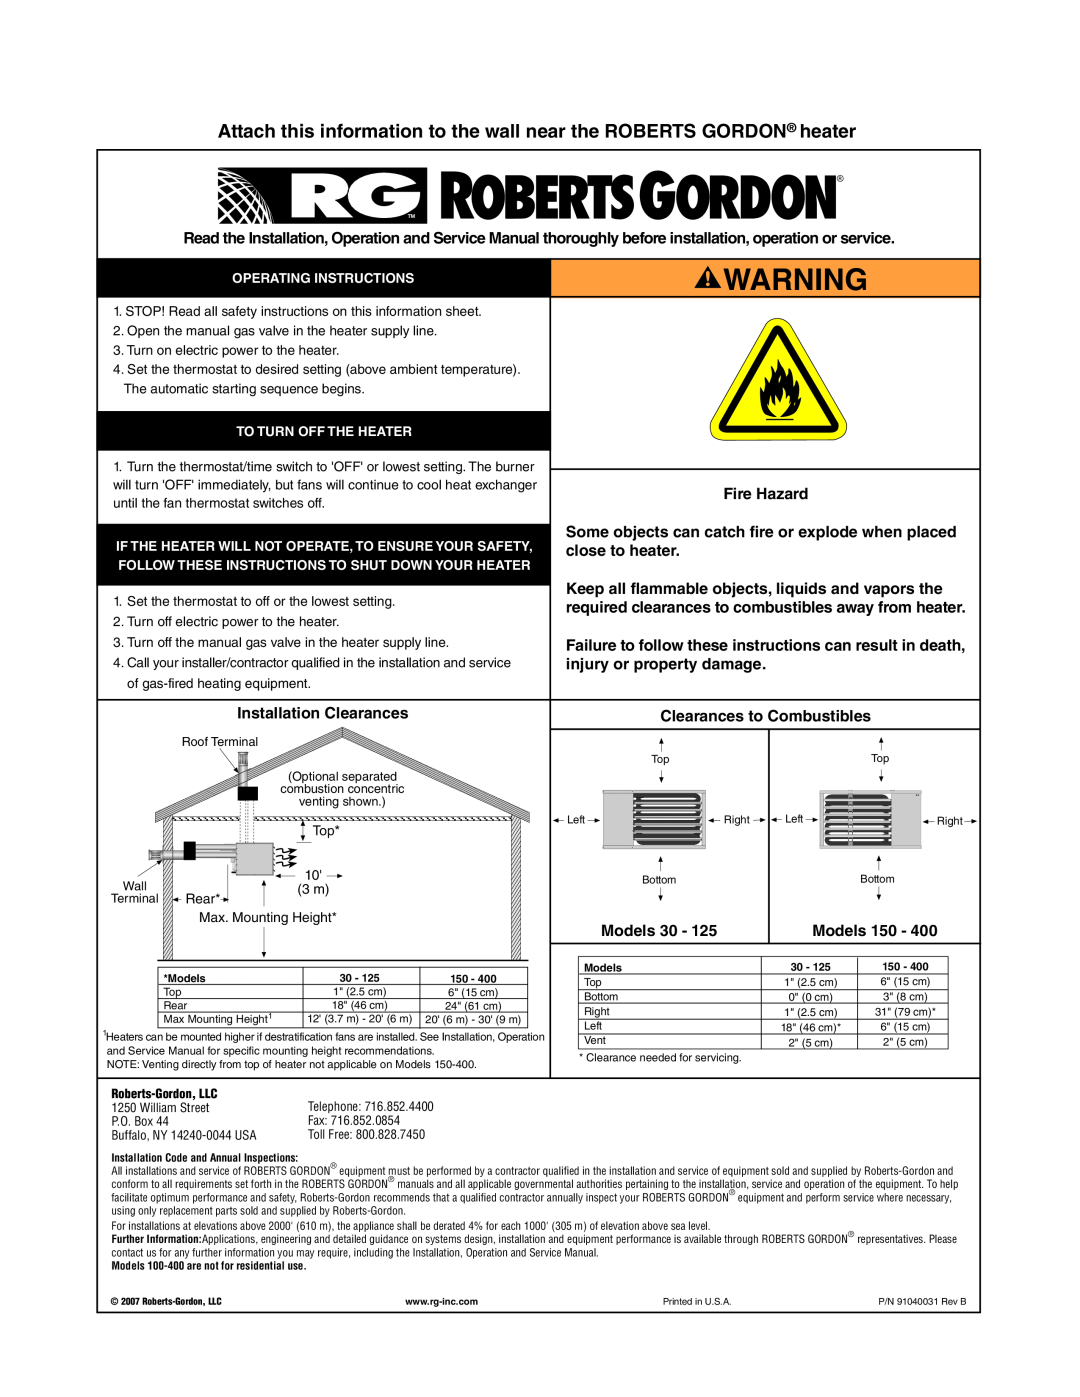 Roberts Gorden 200, 350, 150, 400 Fire Hazard, close to heater, injury or property damage, Installation Clearances, Models 